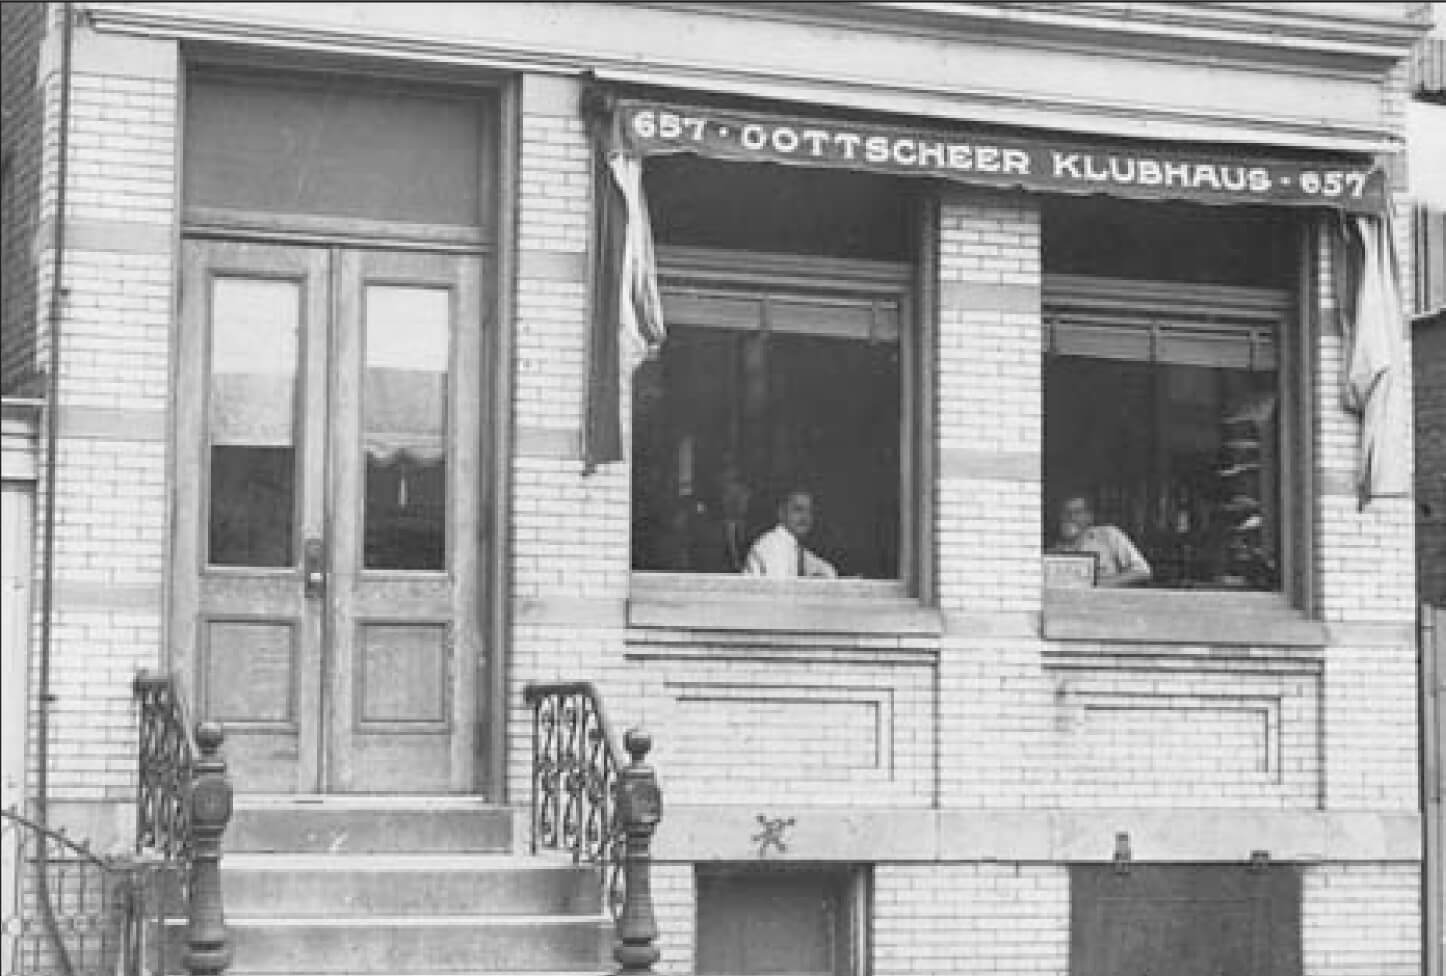 The old Gottscheer Hall clubhouse at 657 Fairview Ave. in Ridgewood is shown in this 1940 photo.